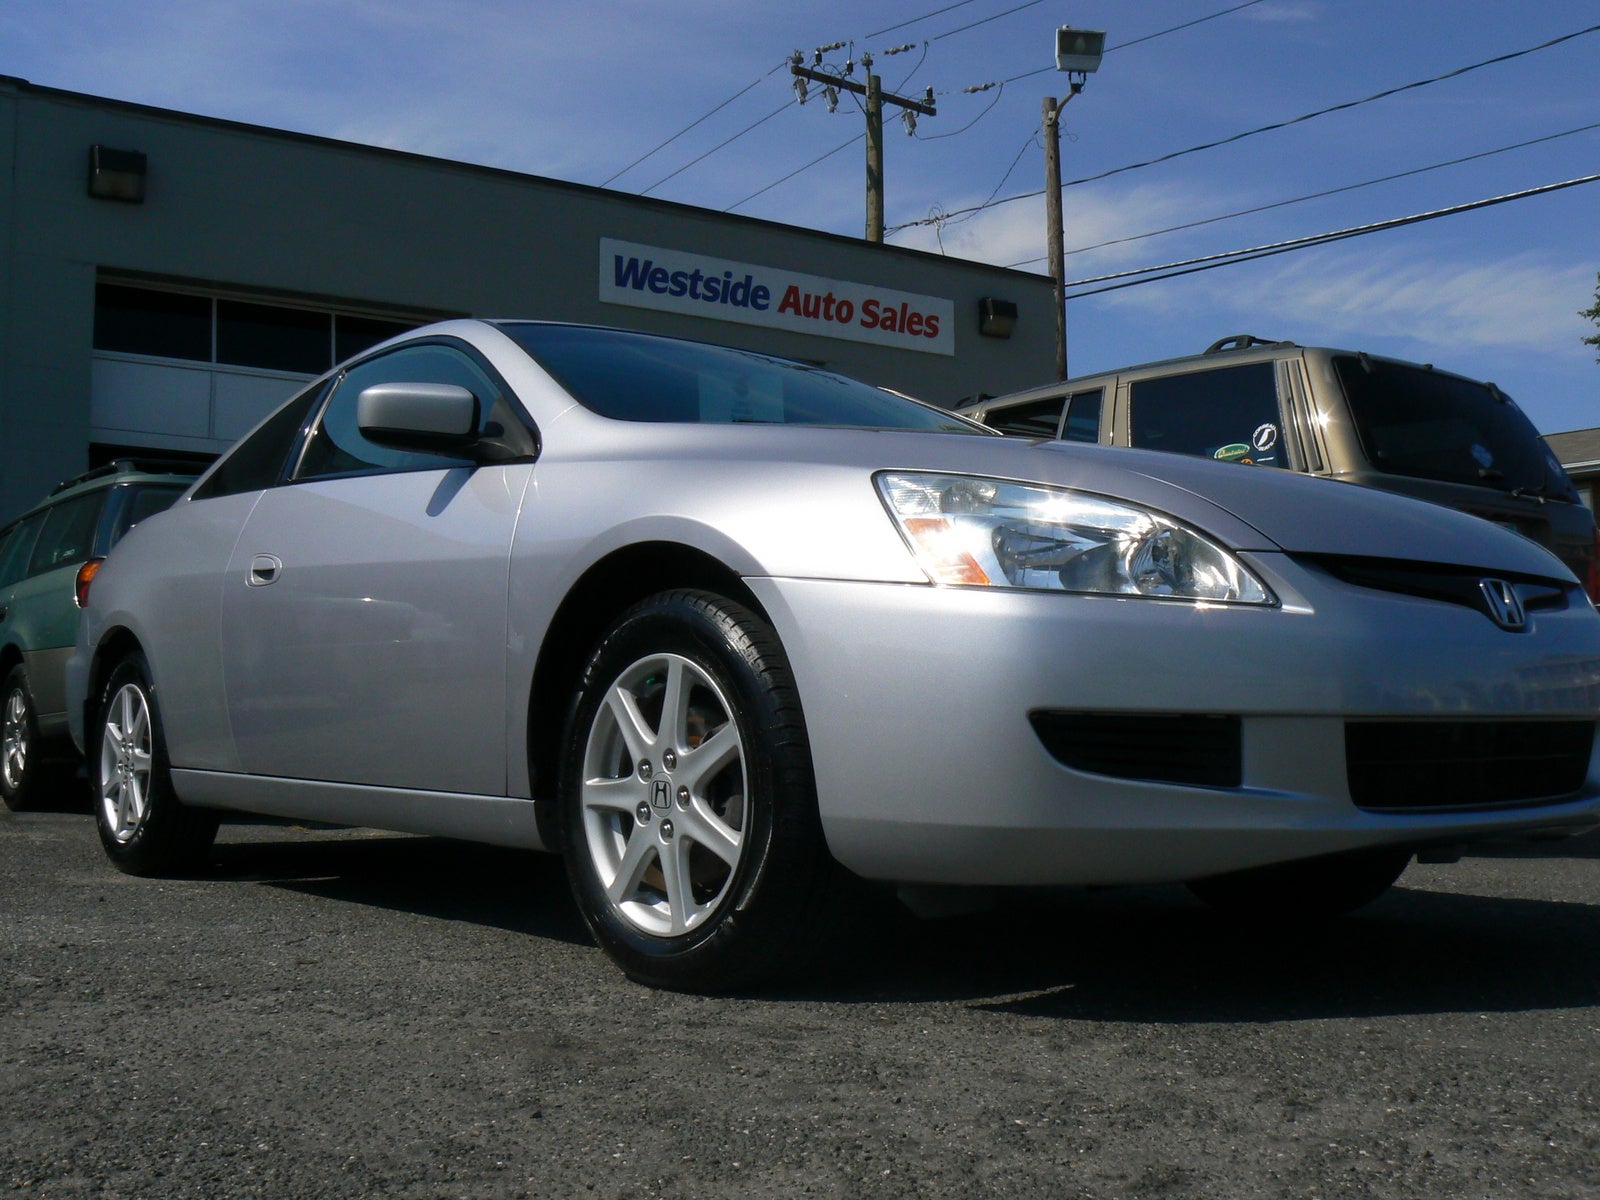 2003 Honda accord ex coupe review #4